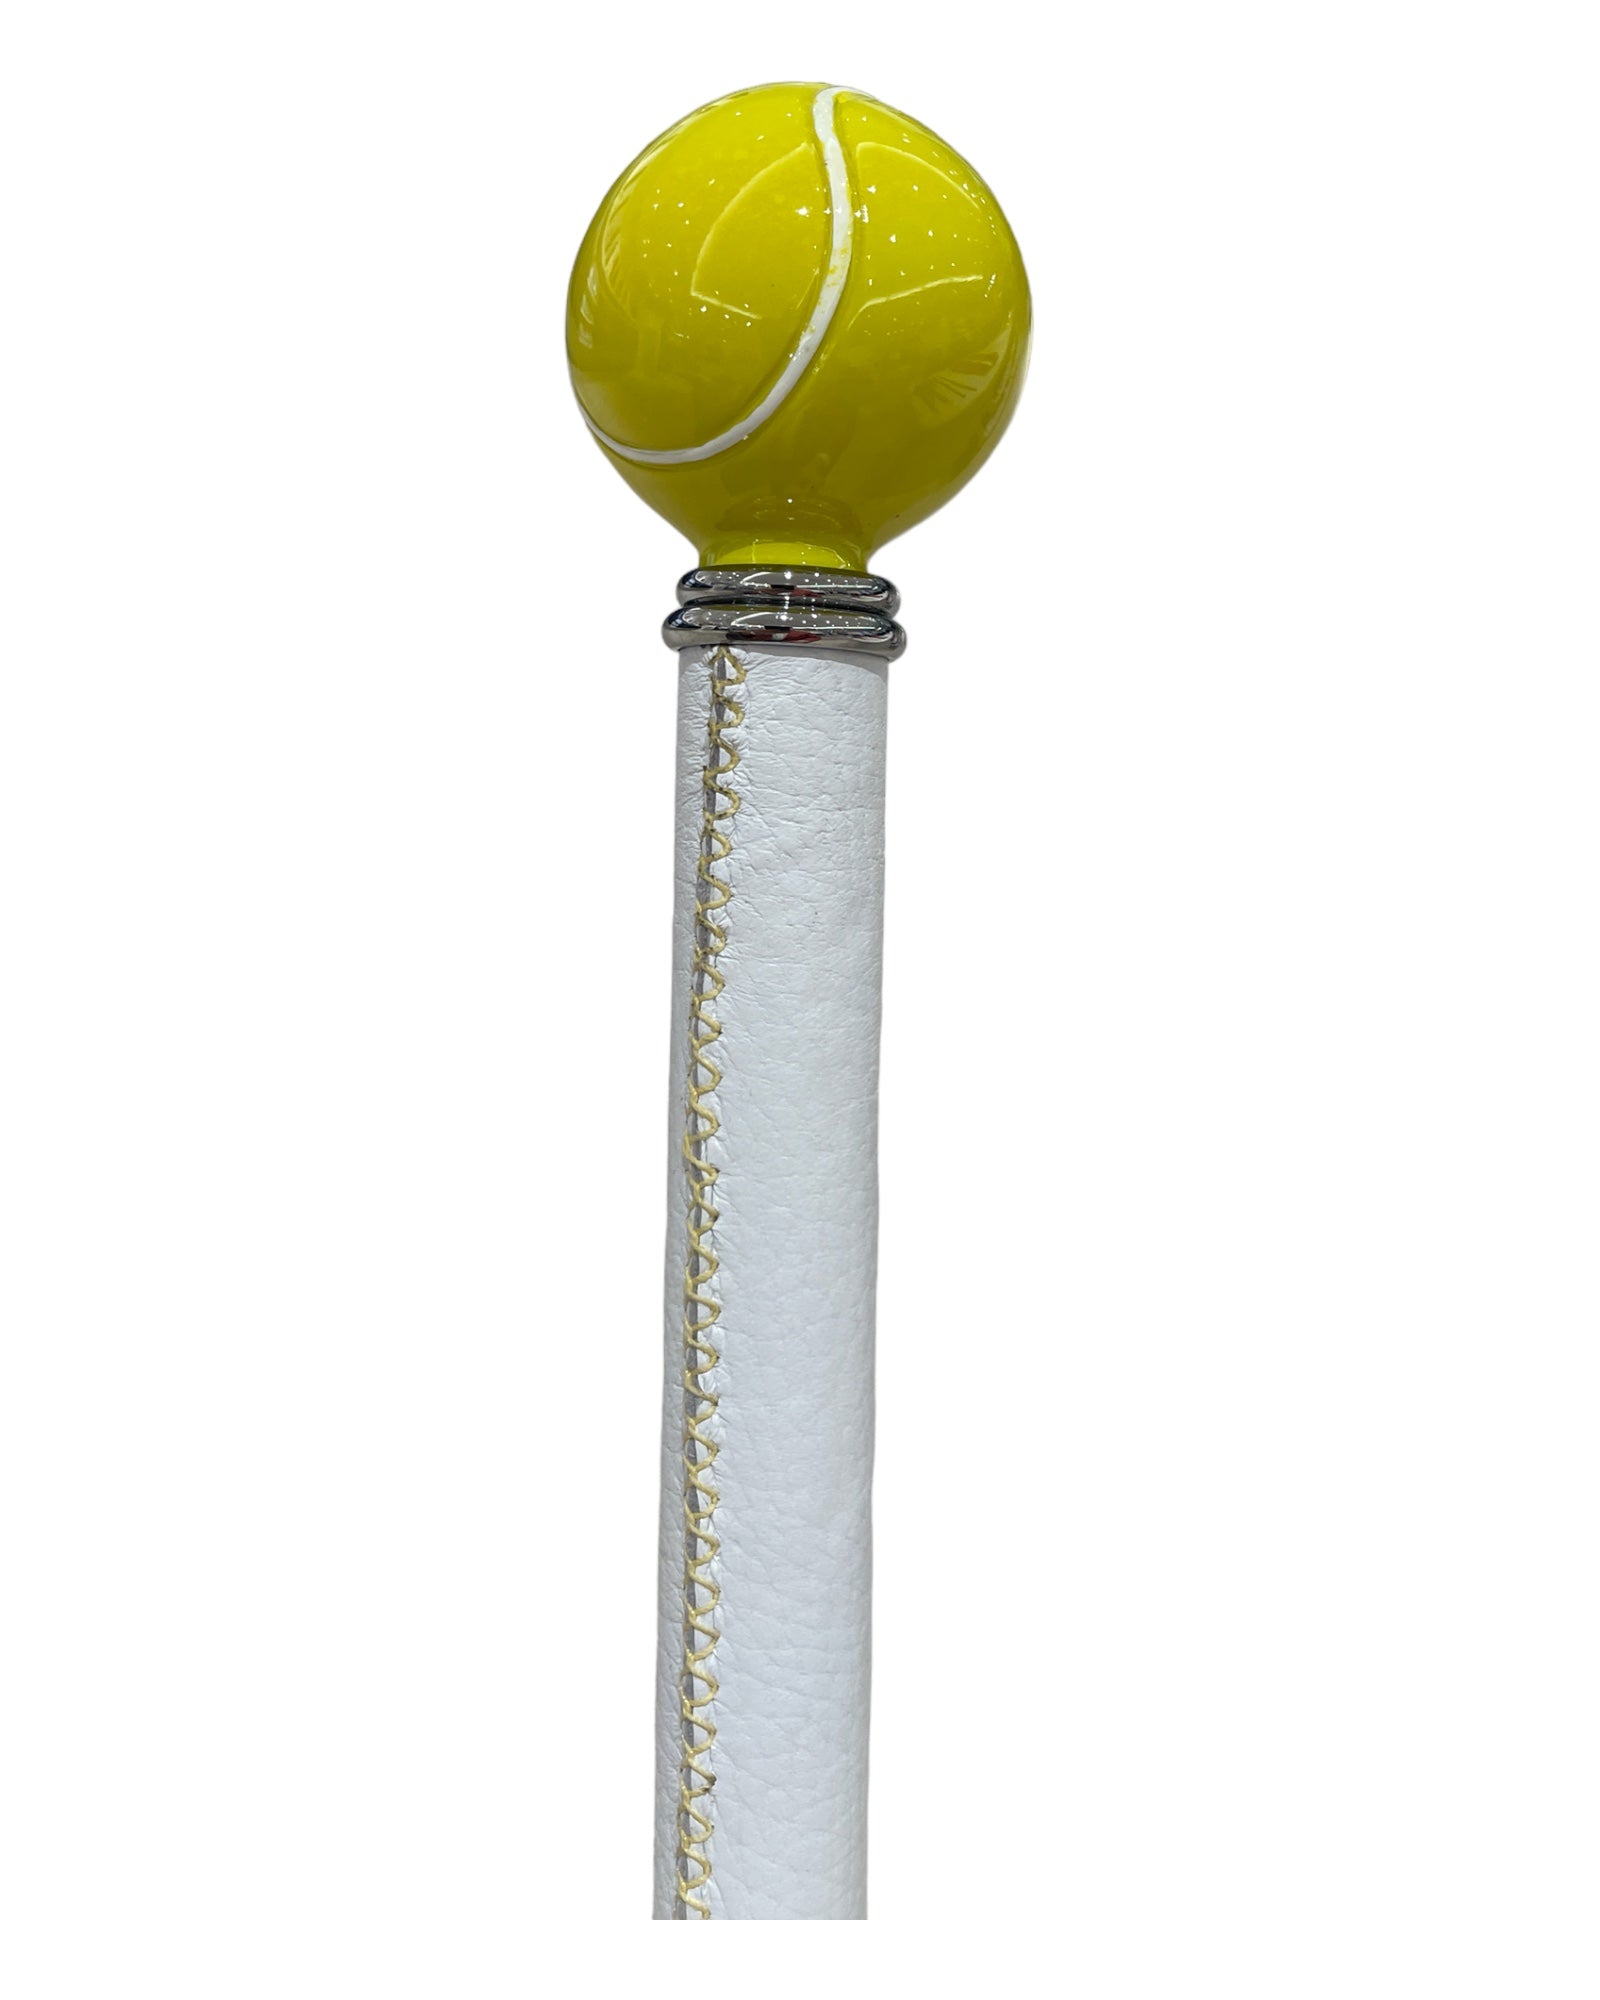 Tennis Ball Long Shoehorn - White Leather Shaft, Yellow Stitches SHOEHORN